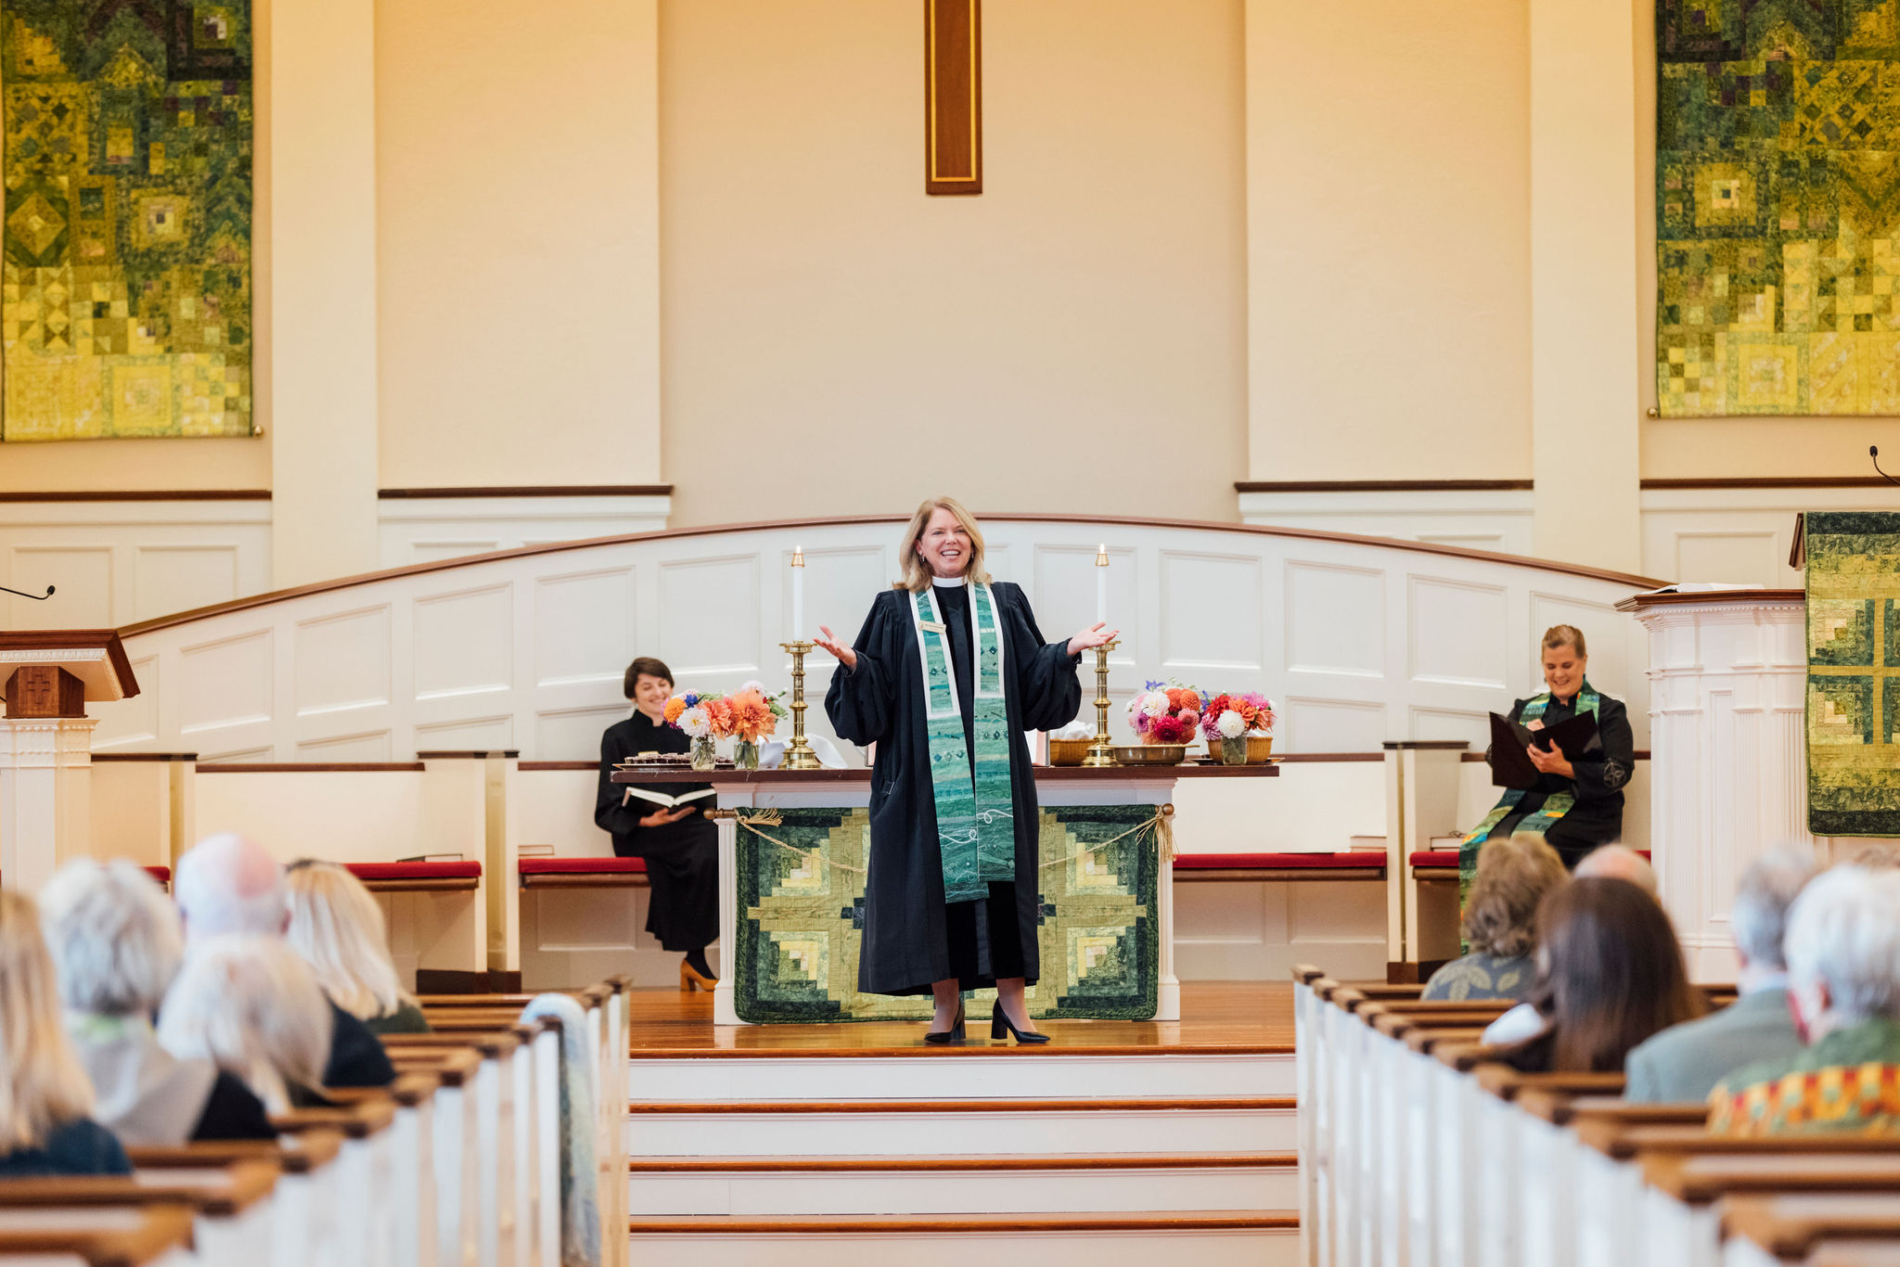 Pastor greets congregation in sanctuary